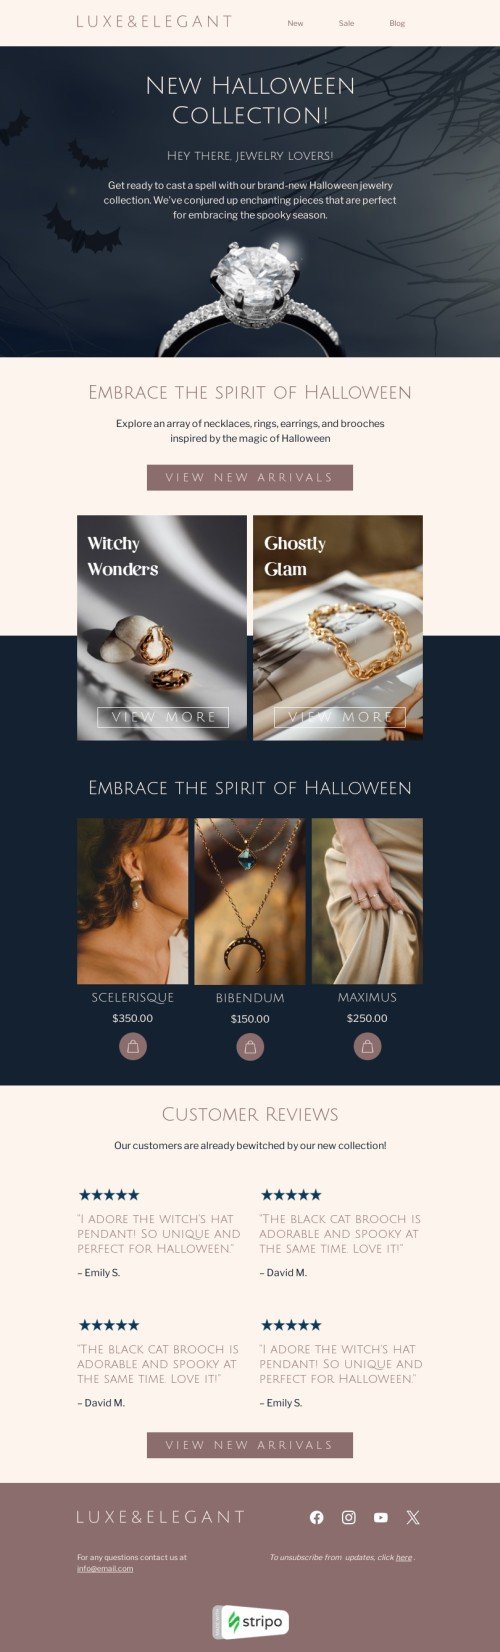 Halloween email template "Jewelry lovers" for jewelry industry desktop view